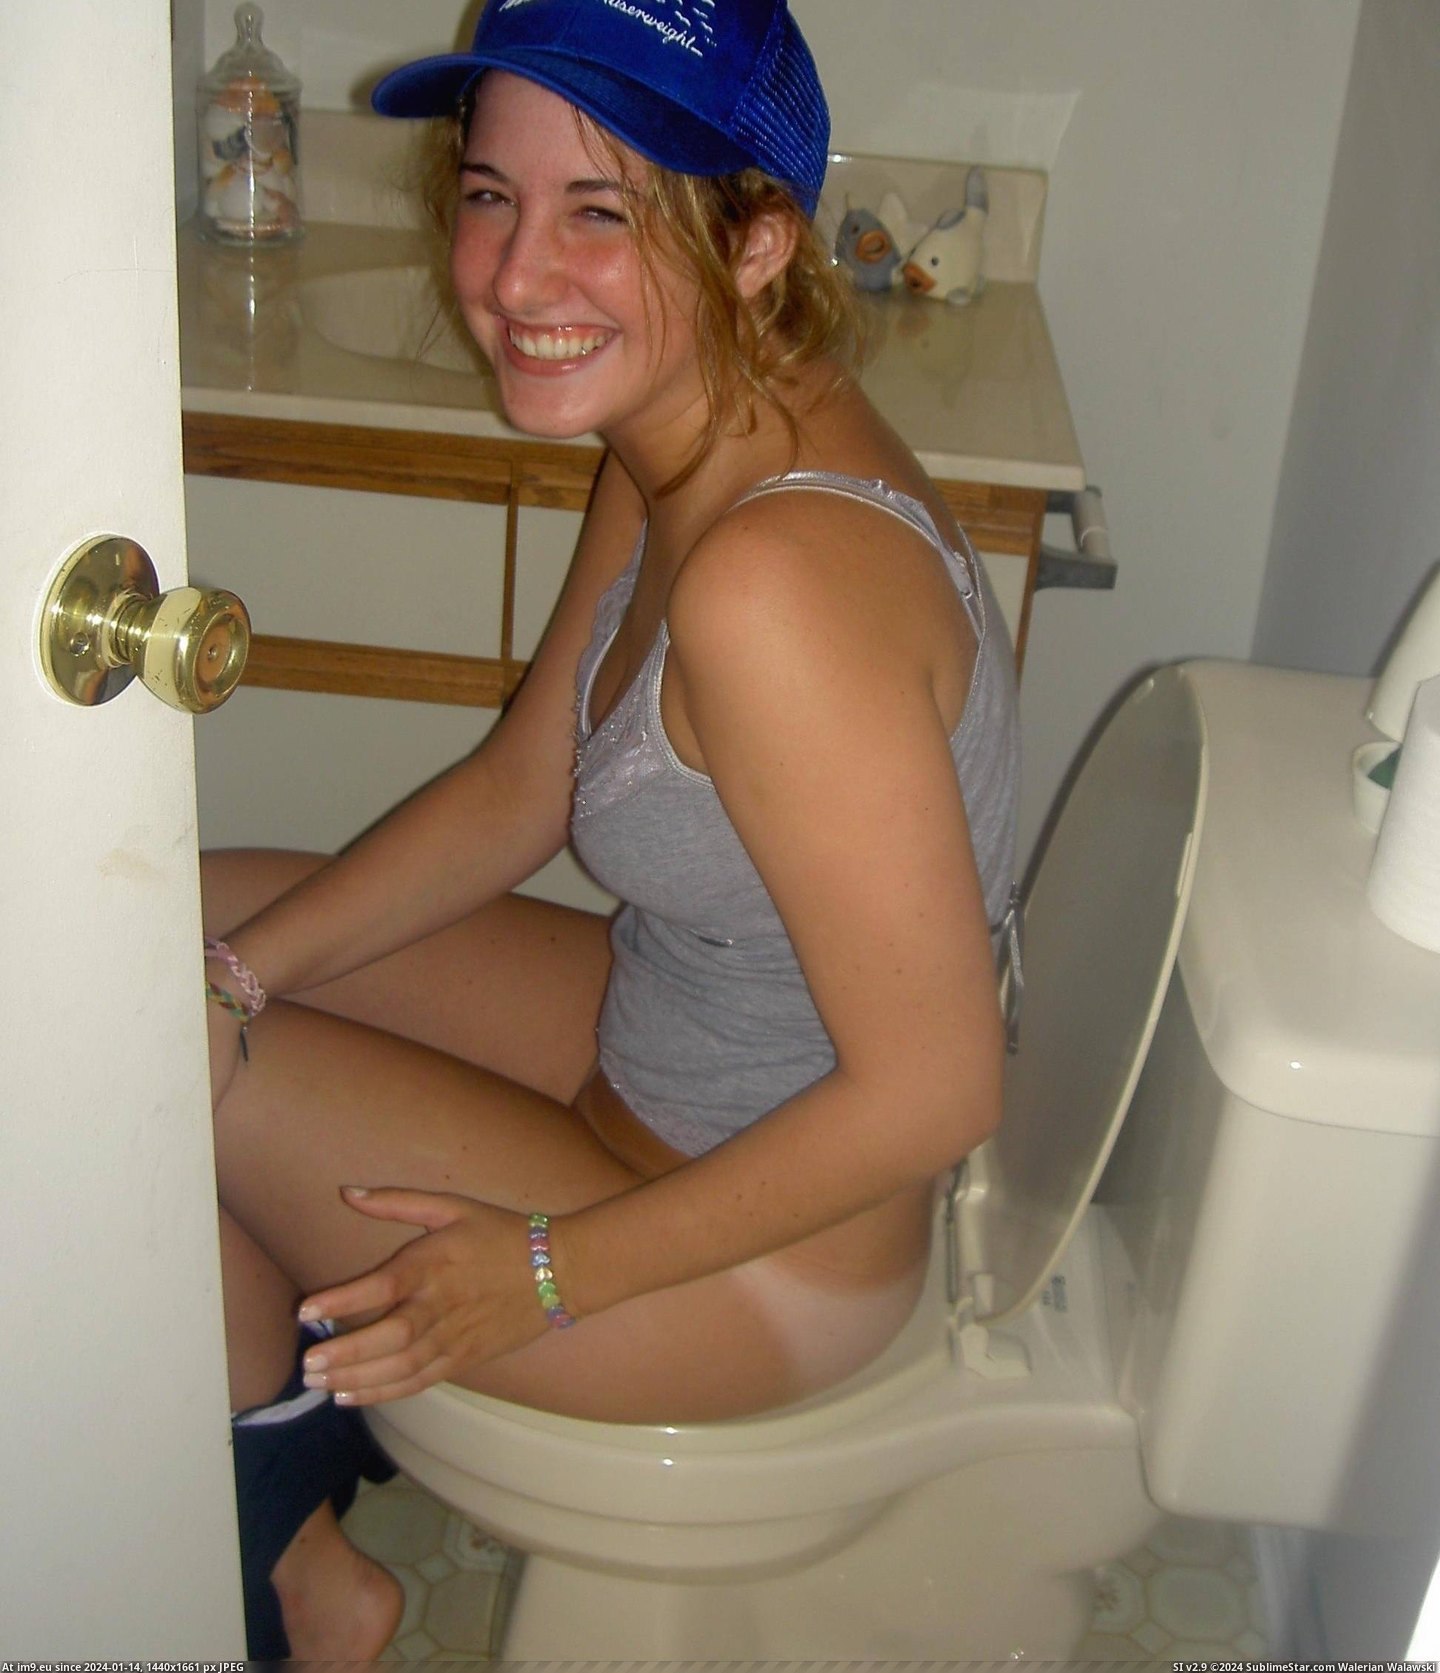 Young Teen Girls Pissing On Toilets 7 (WC toilet bowl peeing porn) (in Teen Girls Pissing Porn (Young Teens Toilet Peeing))